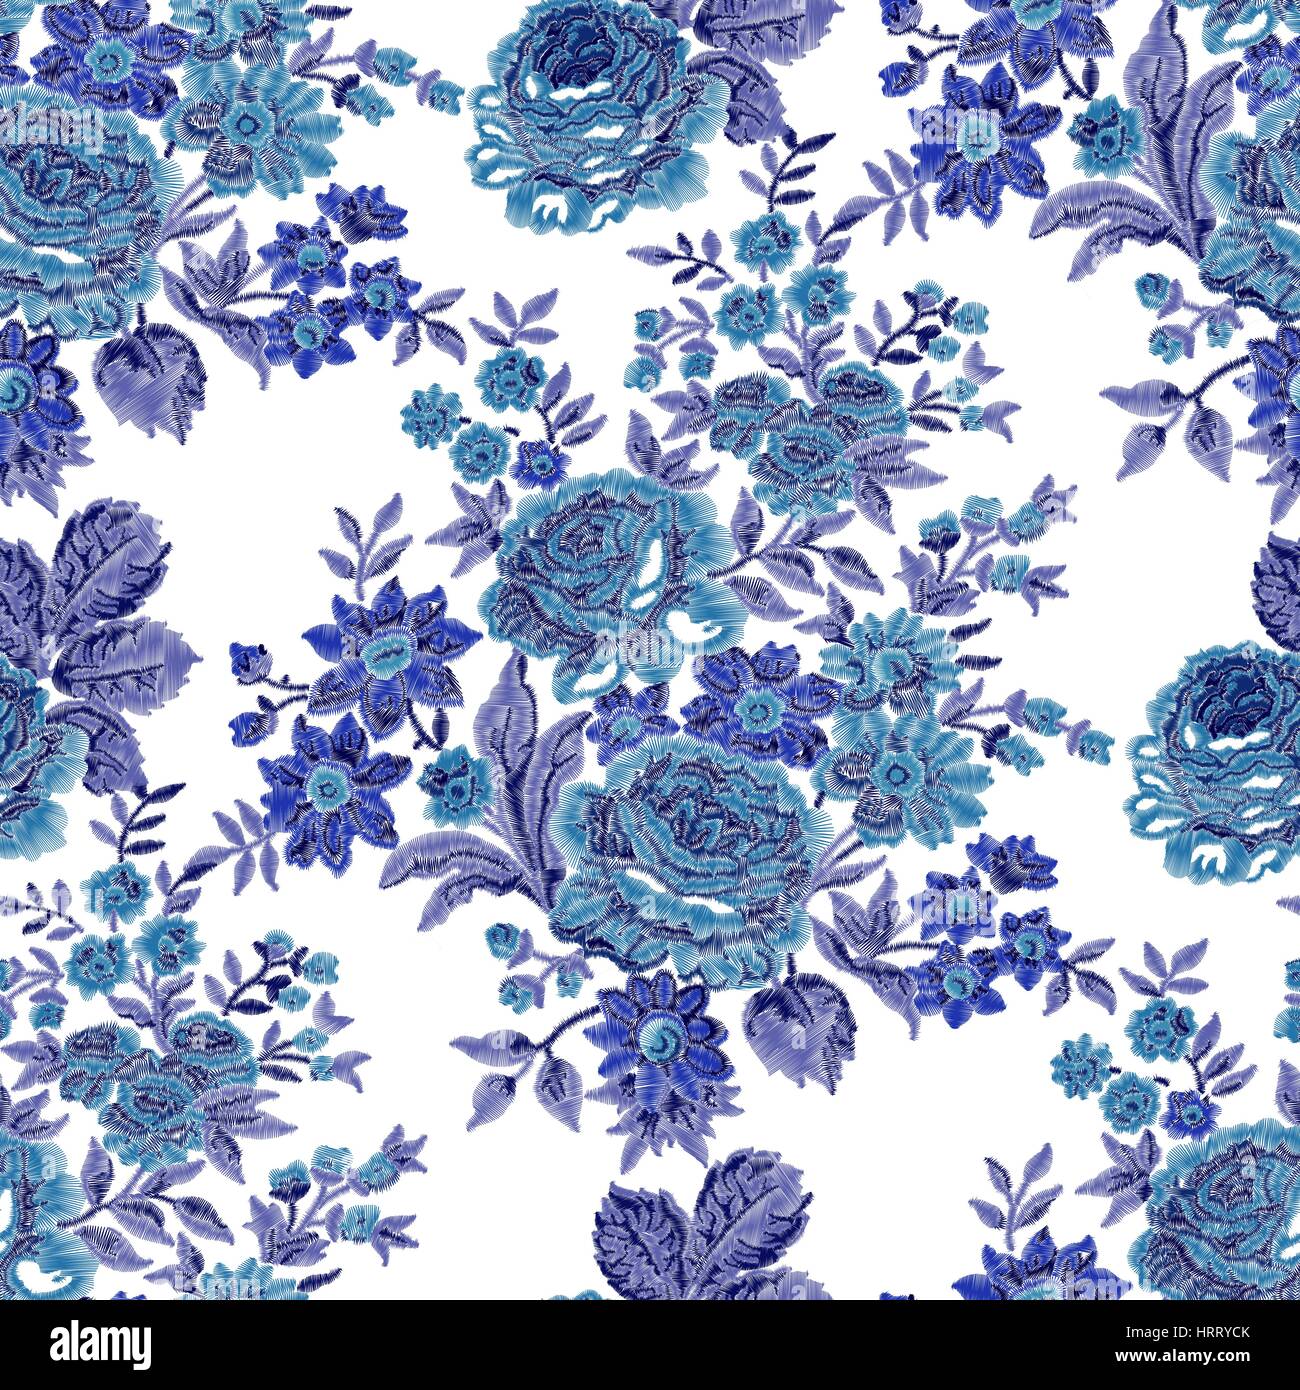 Seamless embroidered floral pattern. Luxurious roses, vintage blue tones. Stock Vector